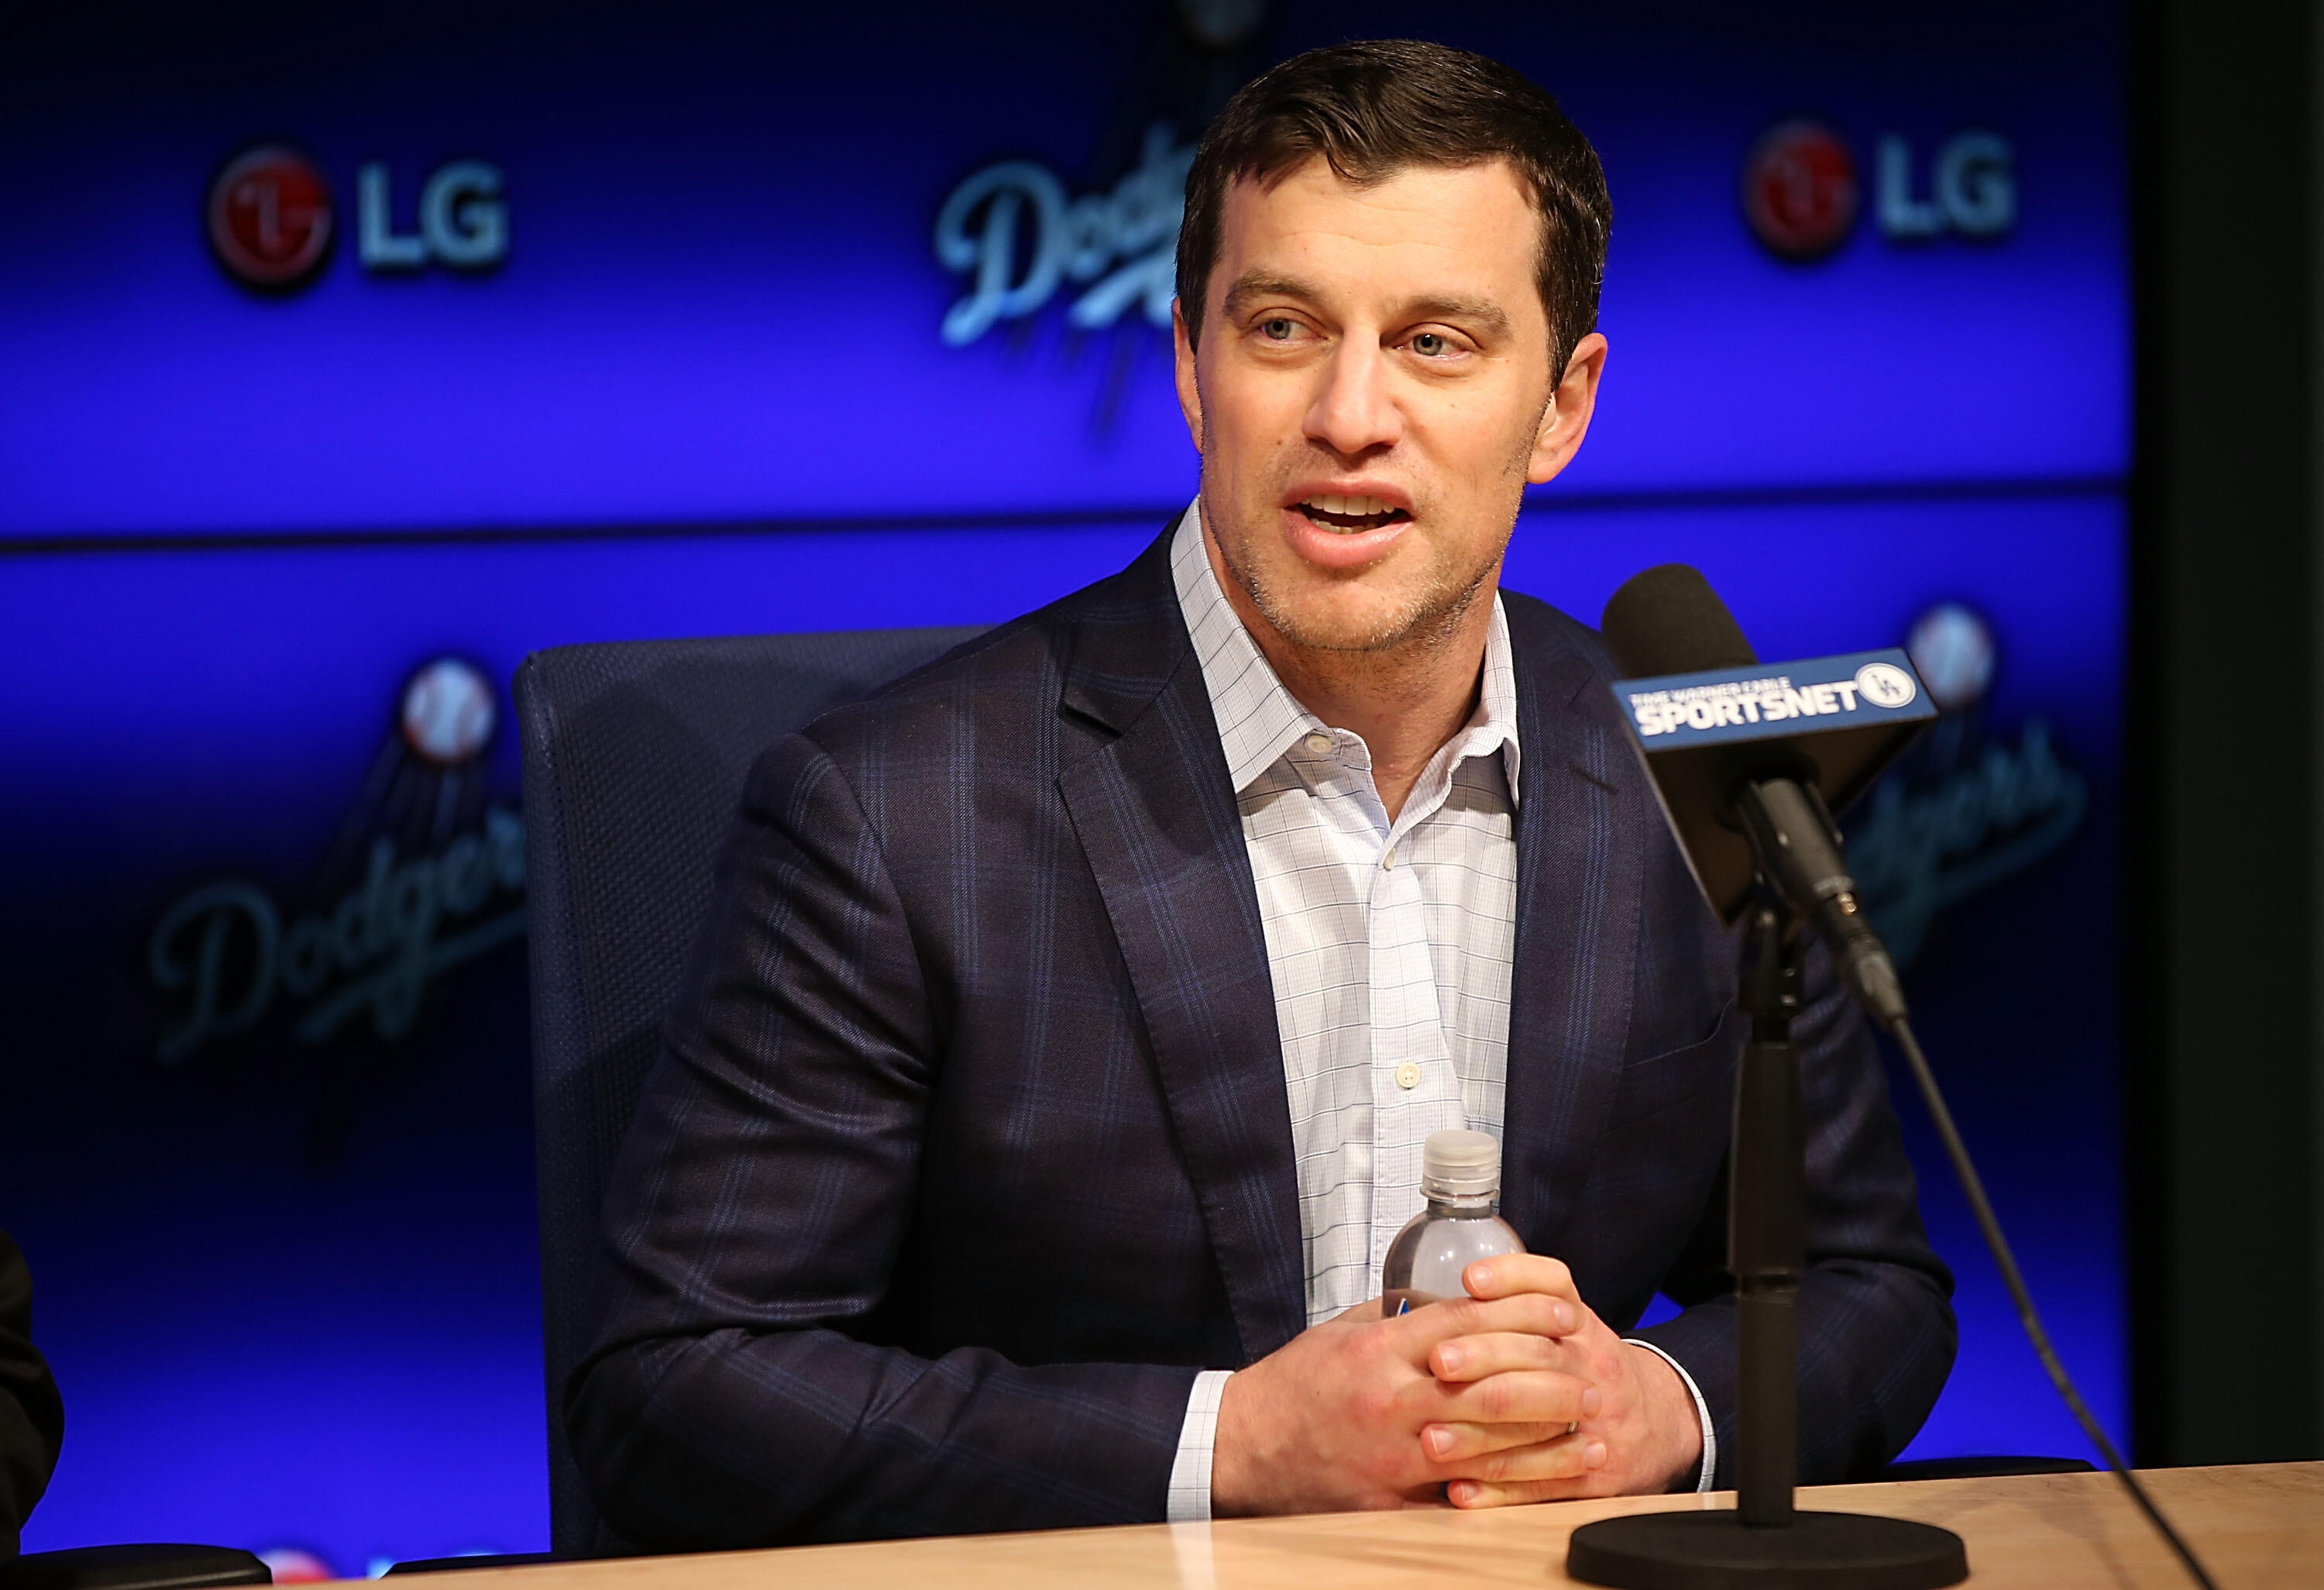 LOS ANGELES, CA - JANUARY 07:  Dodgers president of baseball operations Andrew Friedman introduces Pitcher Kenta Maeda to the Los Angeles Dodgers at Dodger Stadium on January 7, 2016 in Los Angeles, California.  (Photo by Joe Scarnici/Getty Images)